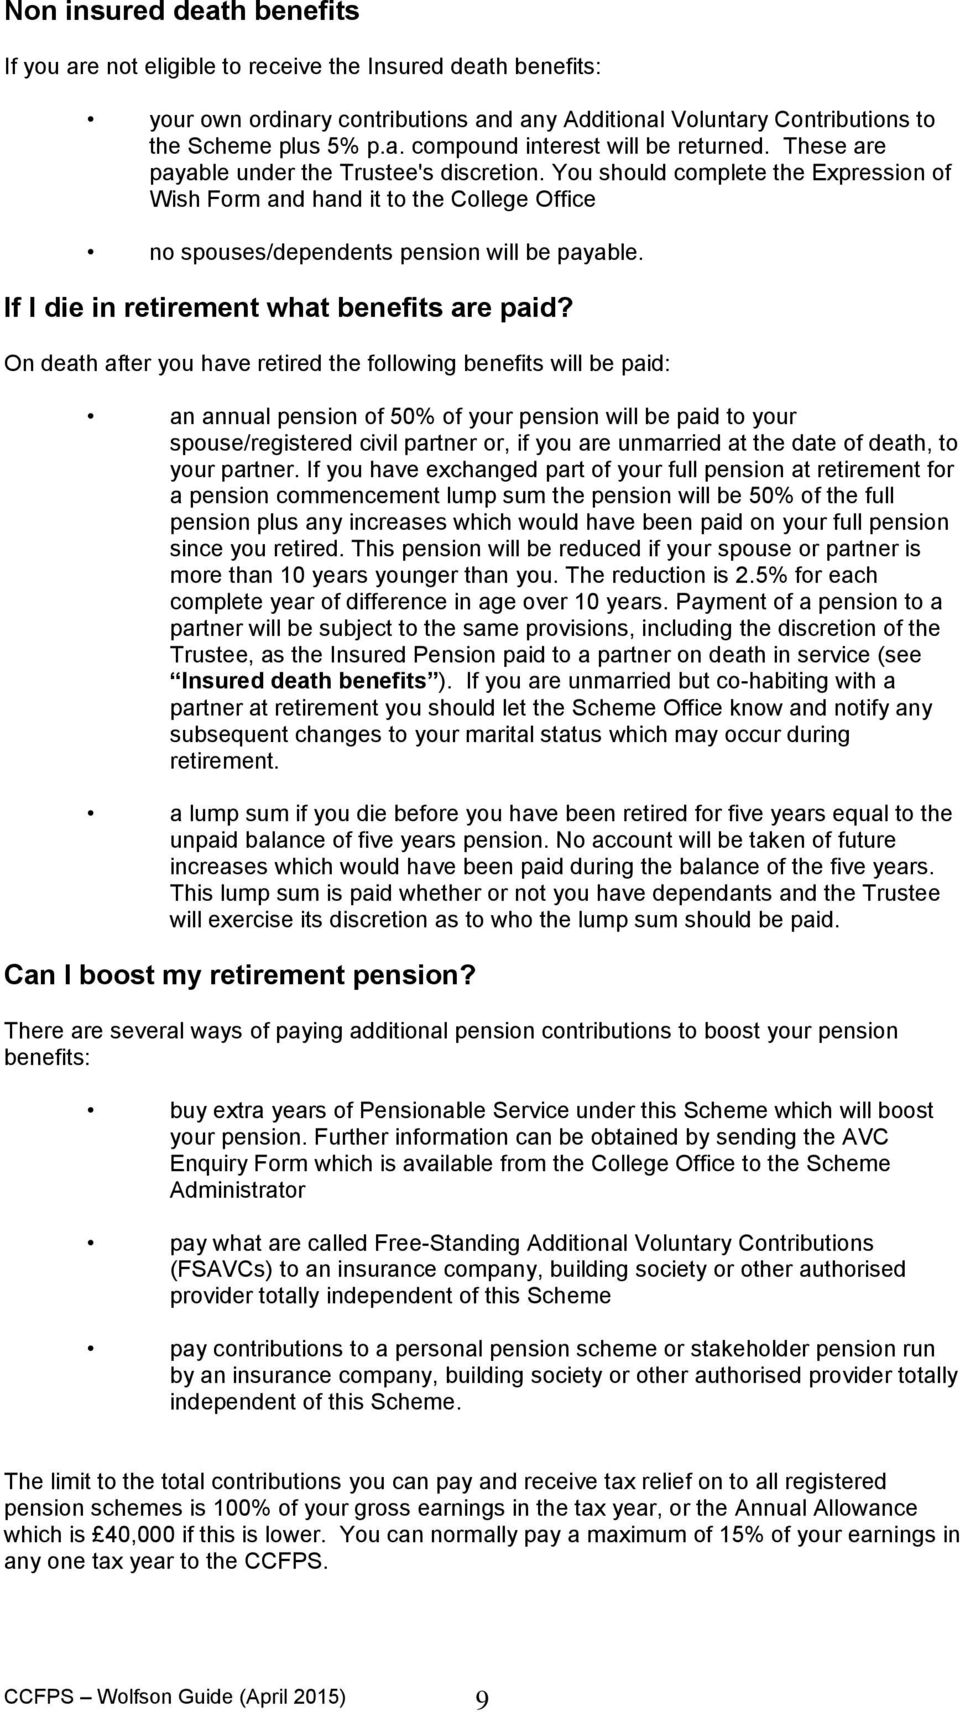 If I die in retirement what benefits are paid?